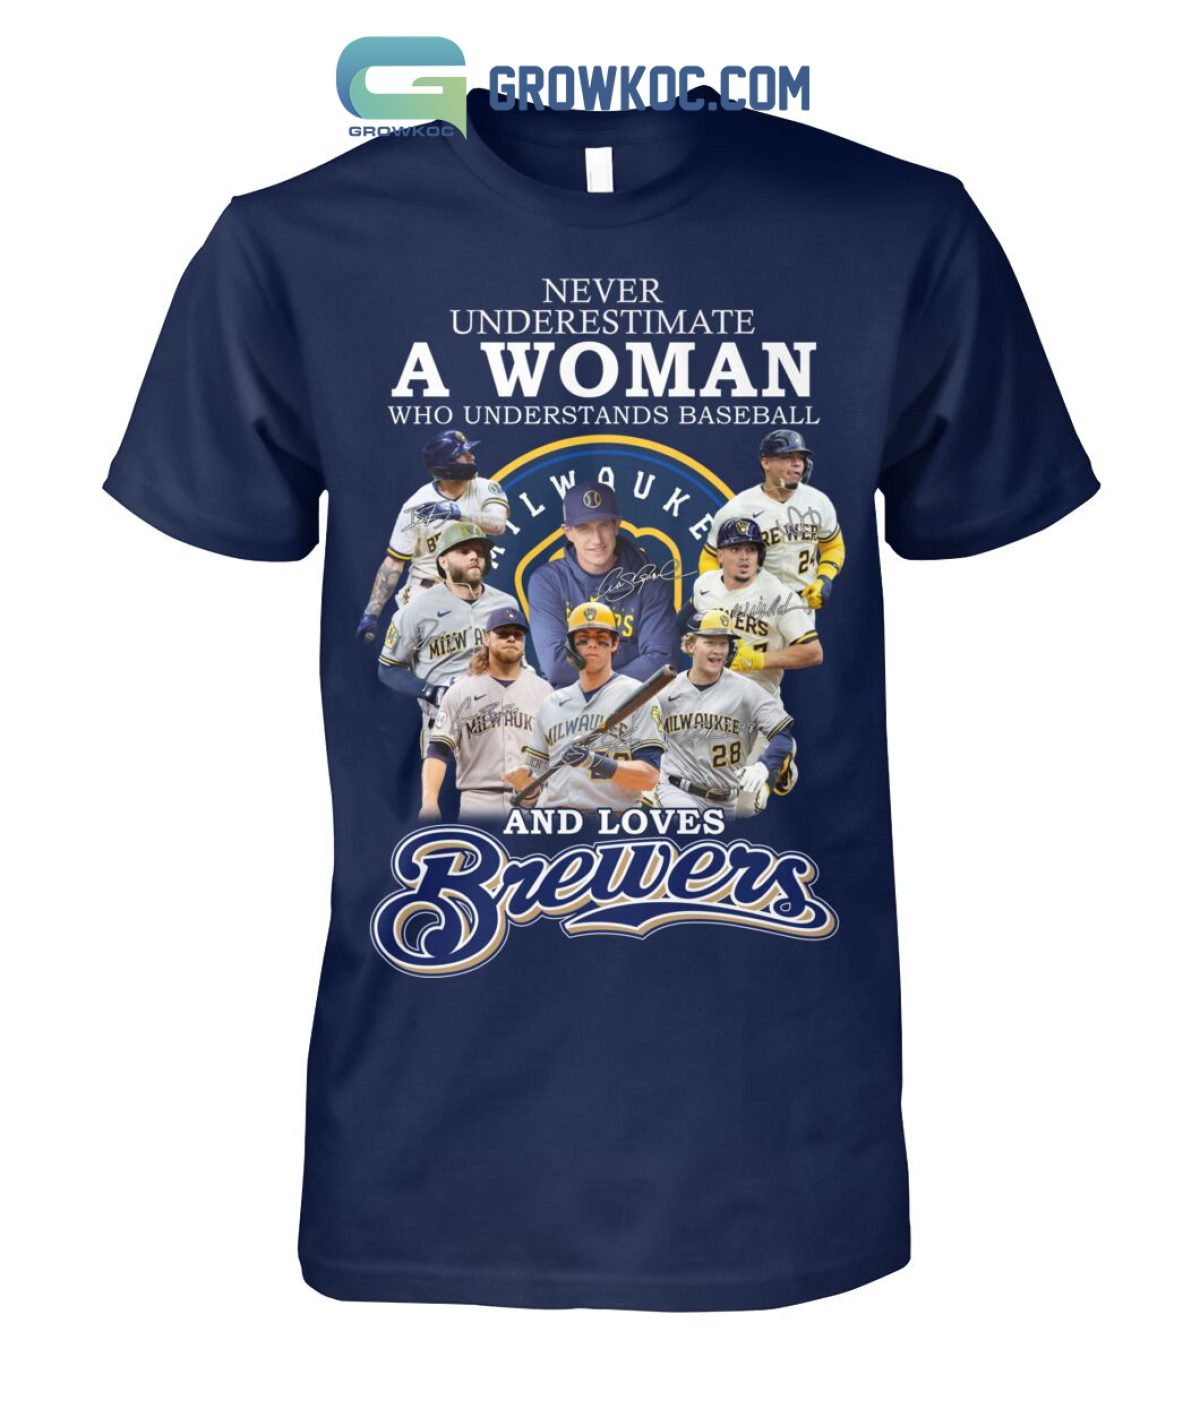 This Girl Loves Her Dodgers Unisex Premium T-Shirt - Power Day Sale